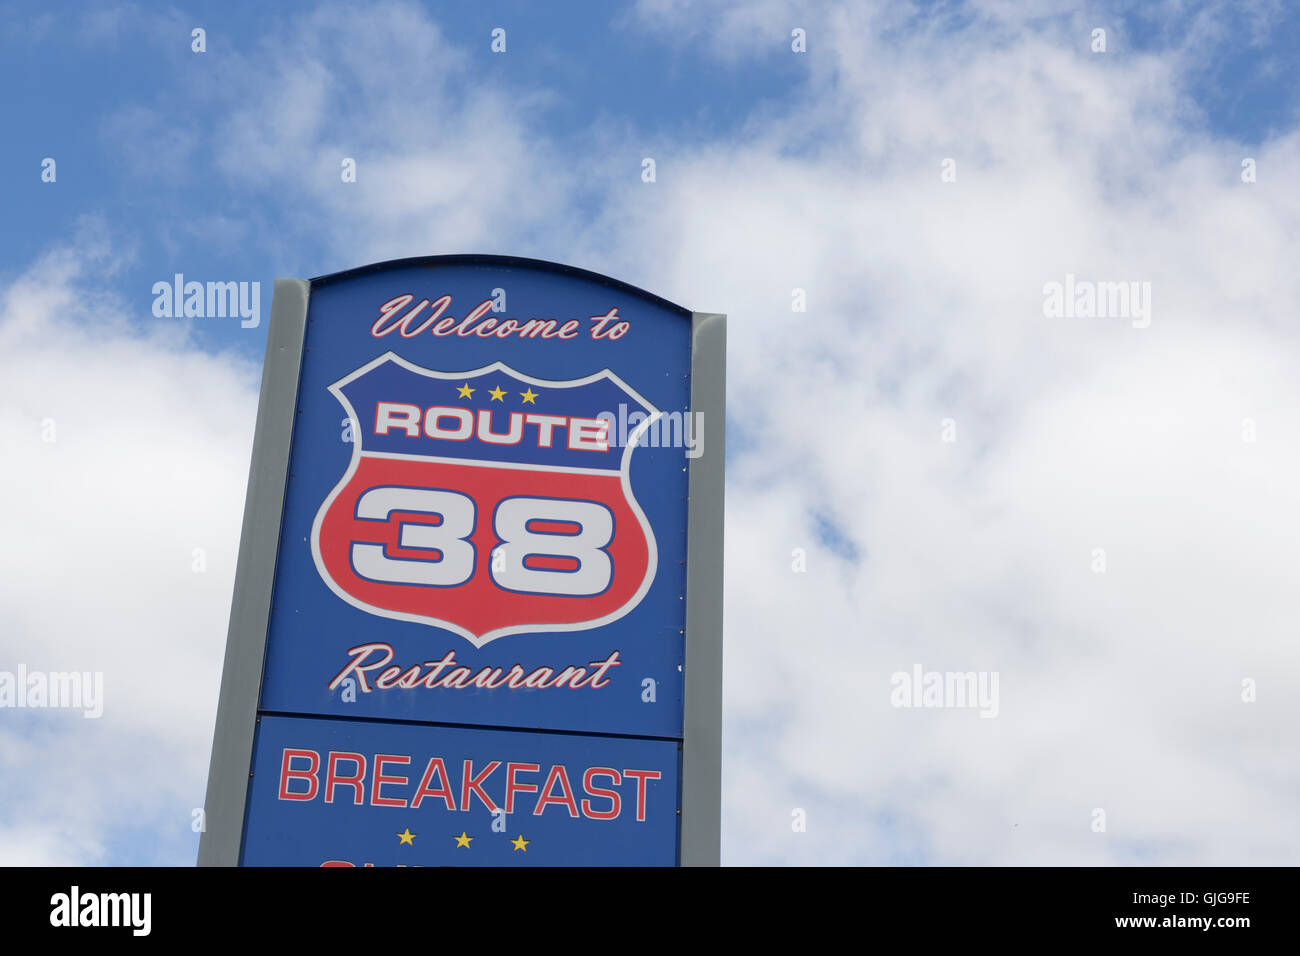 Welcome to Route 38 American Restaurant, England, UK Stock Photo - Alamy